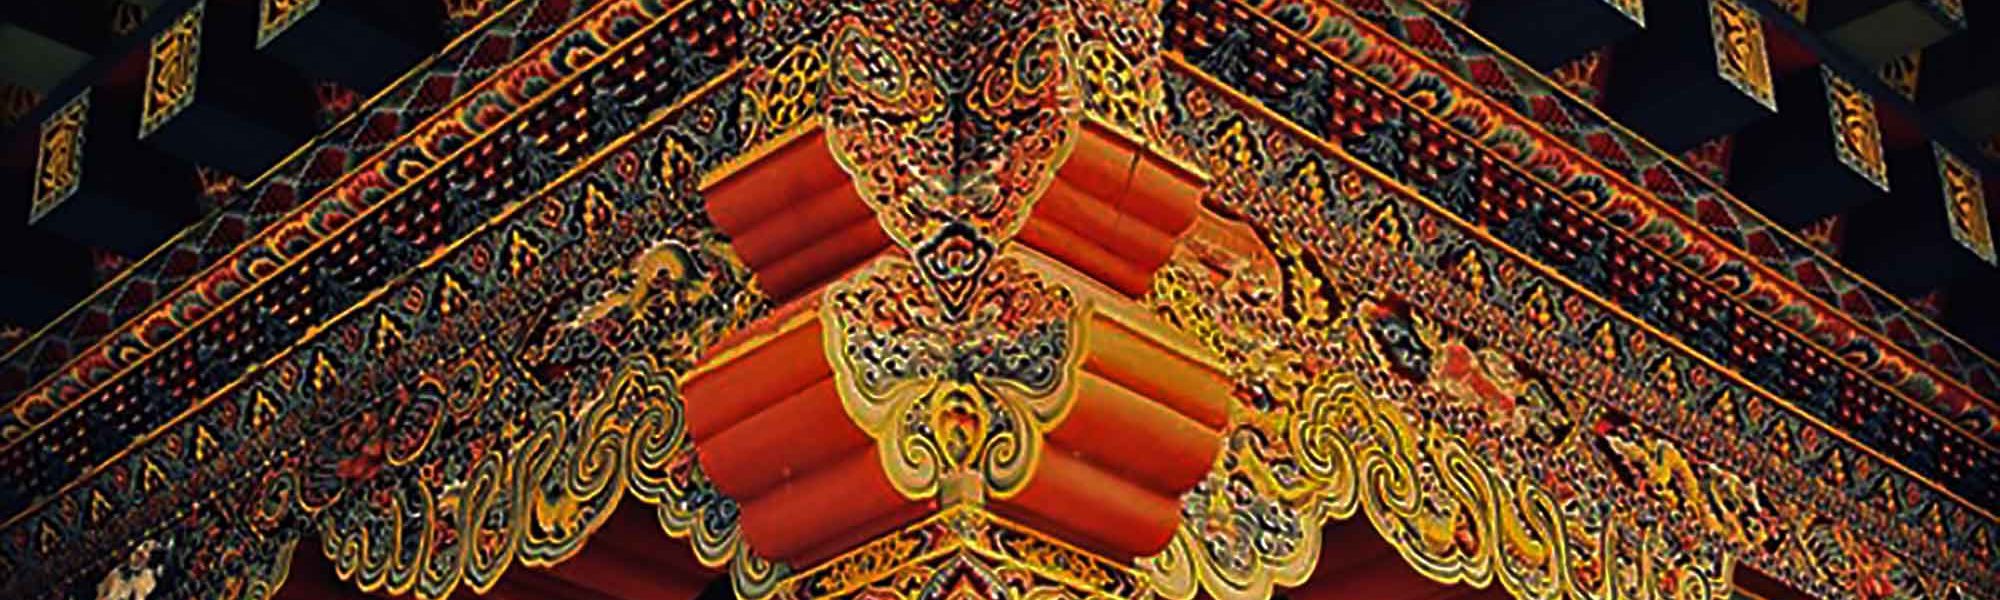 Bhutan Traditional Arts and Crafts